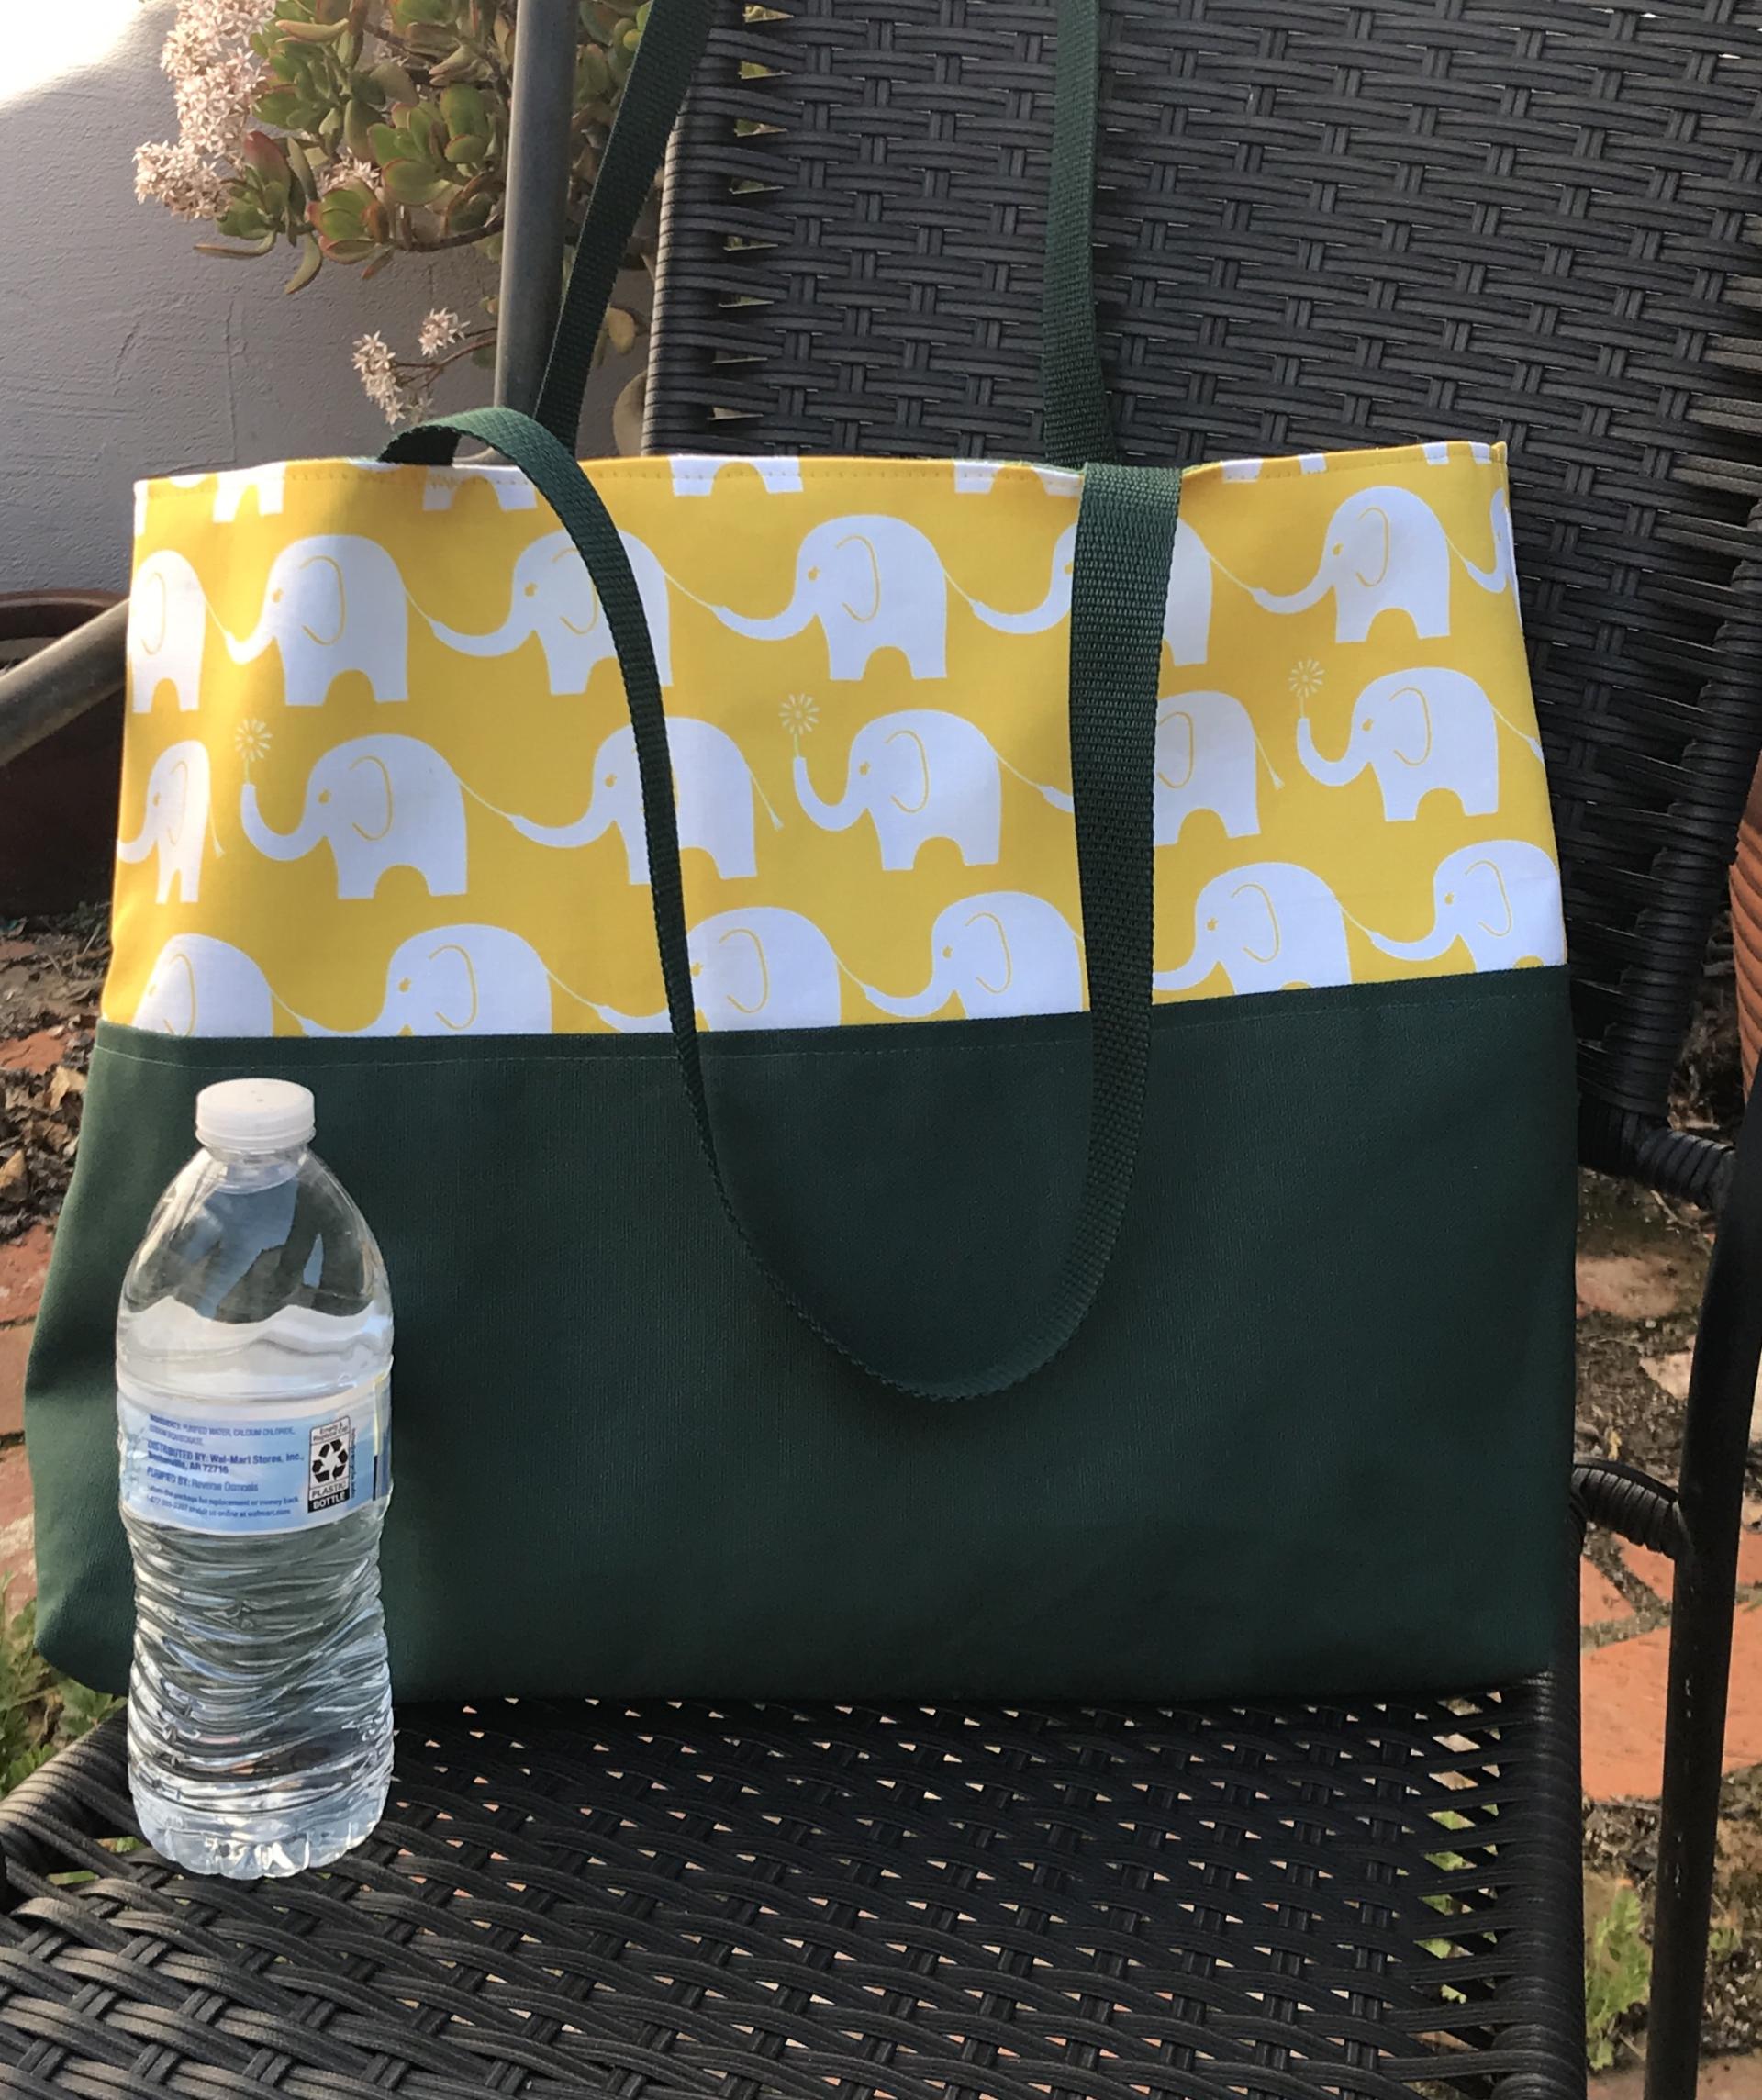 Tote bag, canvas bottom, water bottle shown for scale (not included)